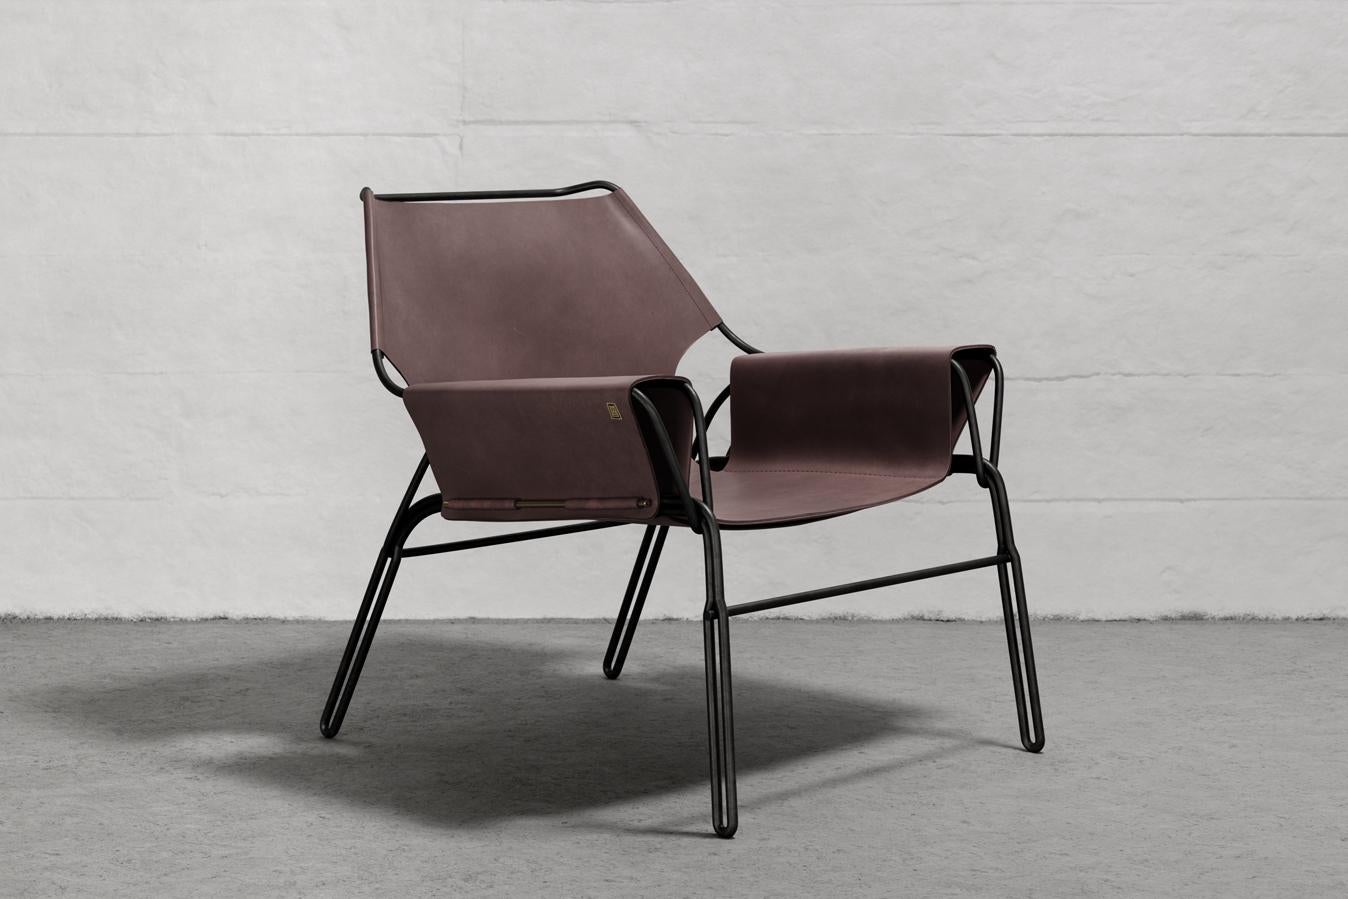 Perfidia_02 Lounge Chair Cognac by ALEJANDRO MOYANO

L 30.5